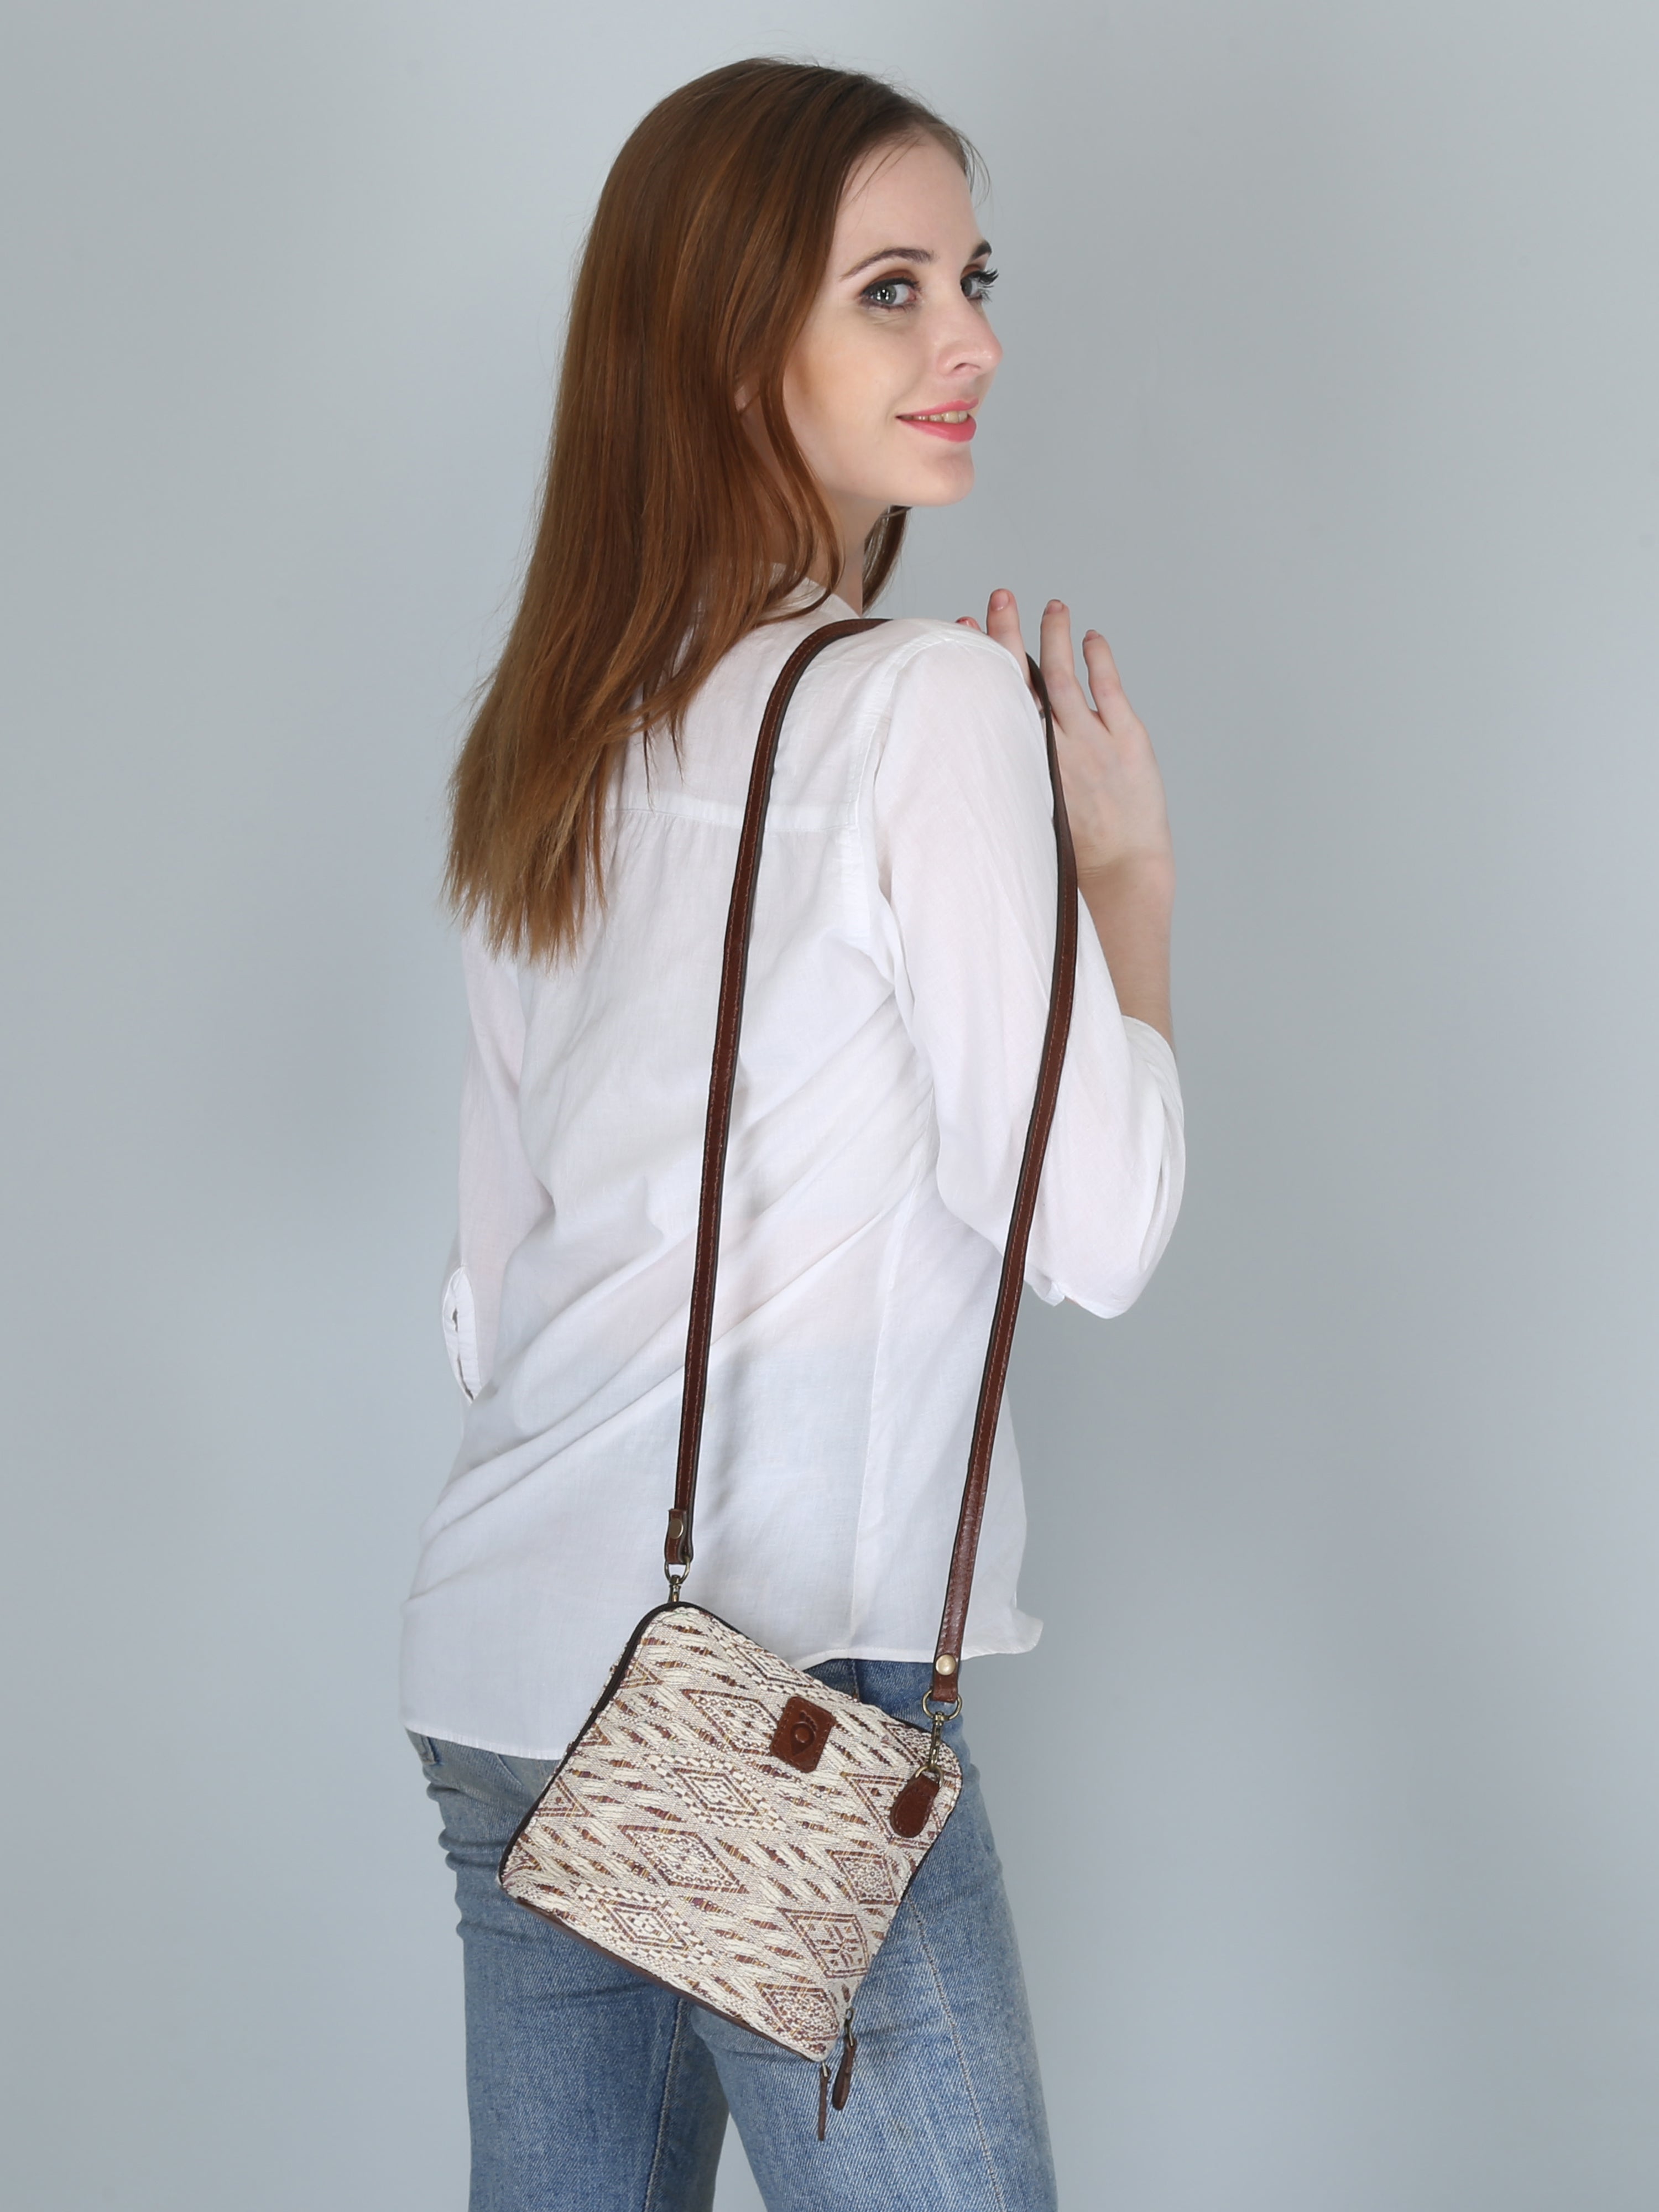 Woven Patterned Sling Bag | Brown and Cream